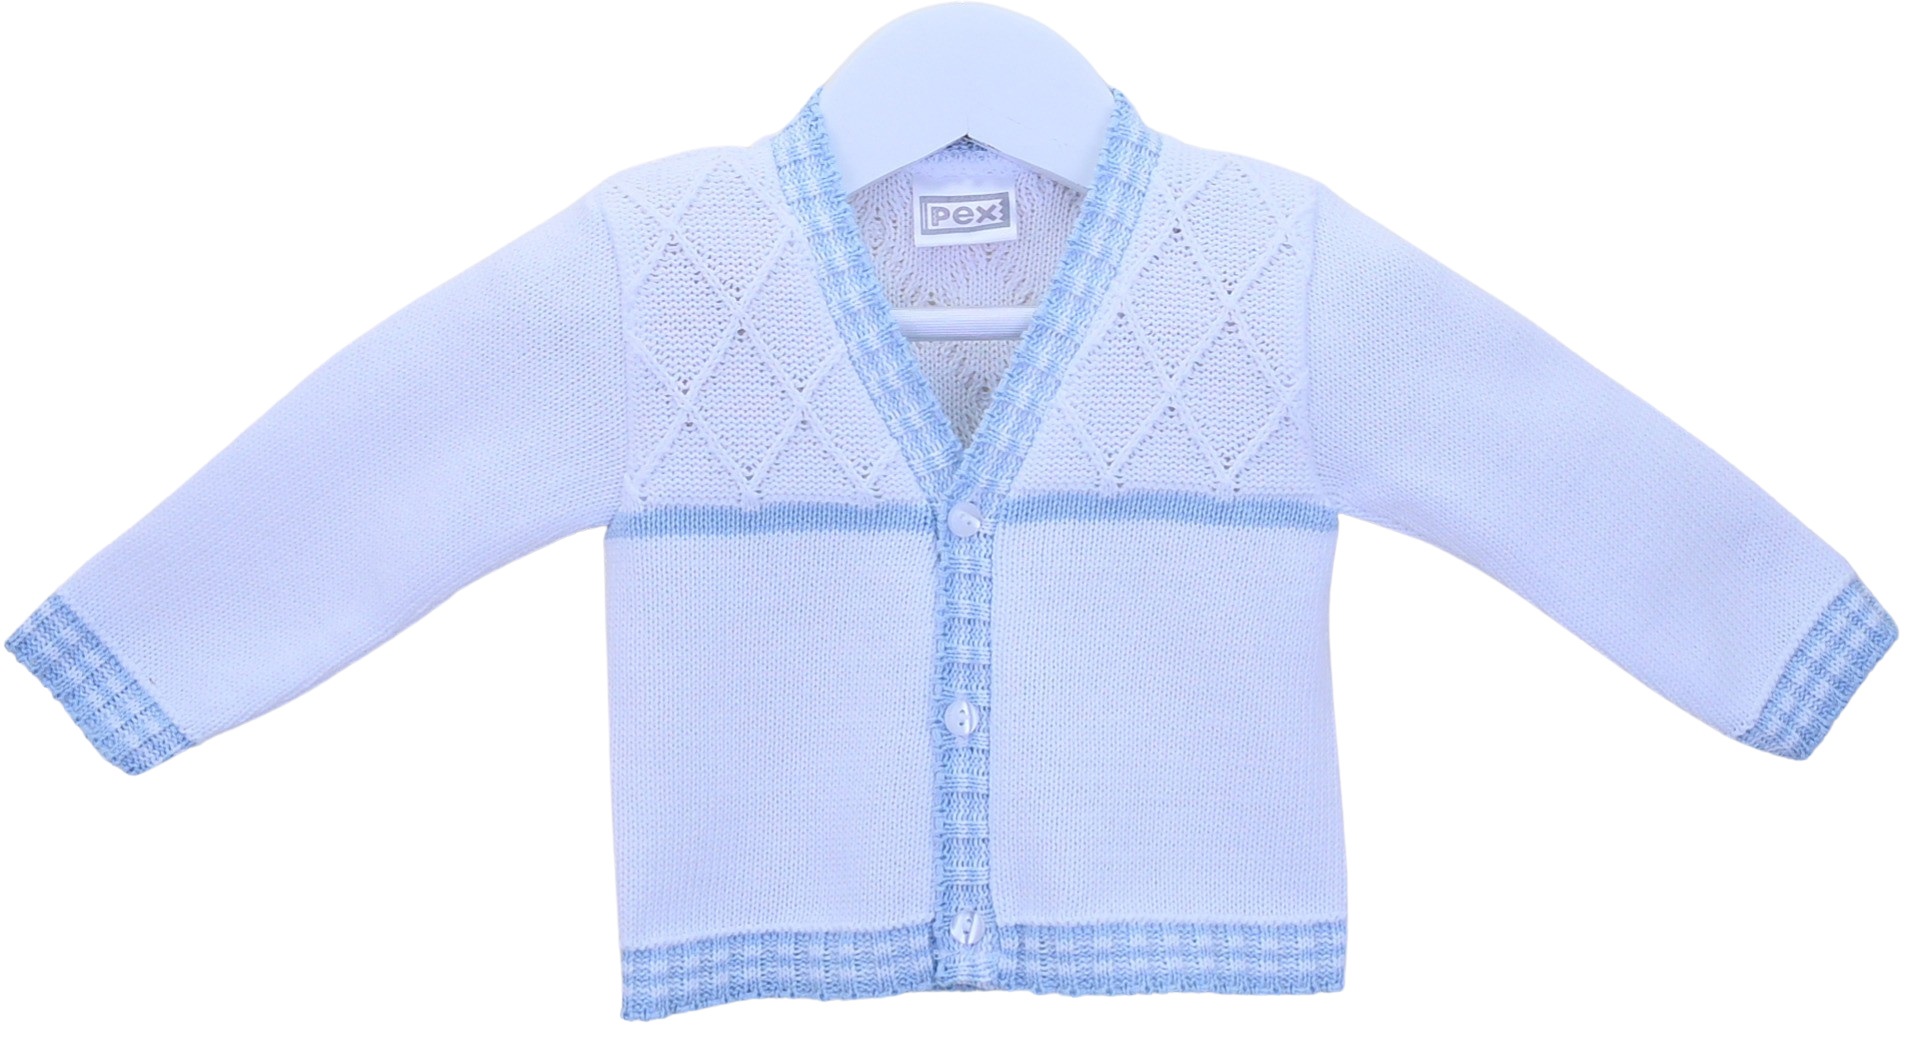 PEX BABY  KNITTED CARDIGAN WHITE WITH BLUE TRIM OR WHITE WITH PINK TRIM STYLE 21 